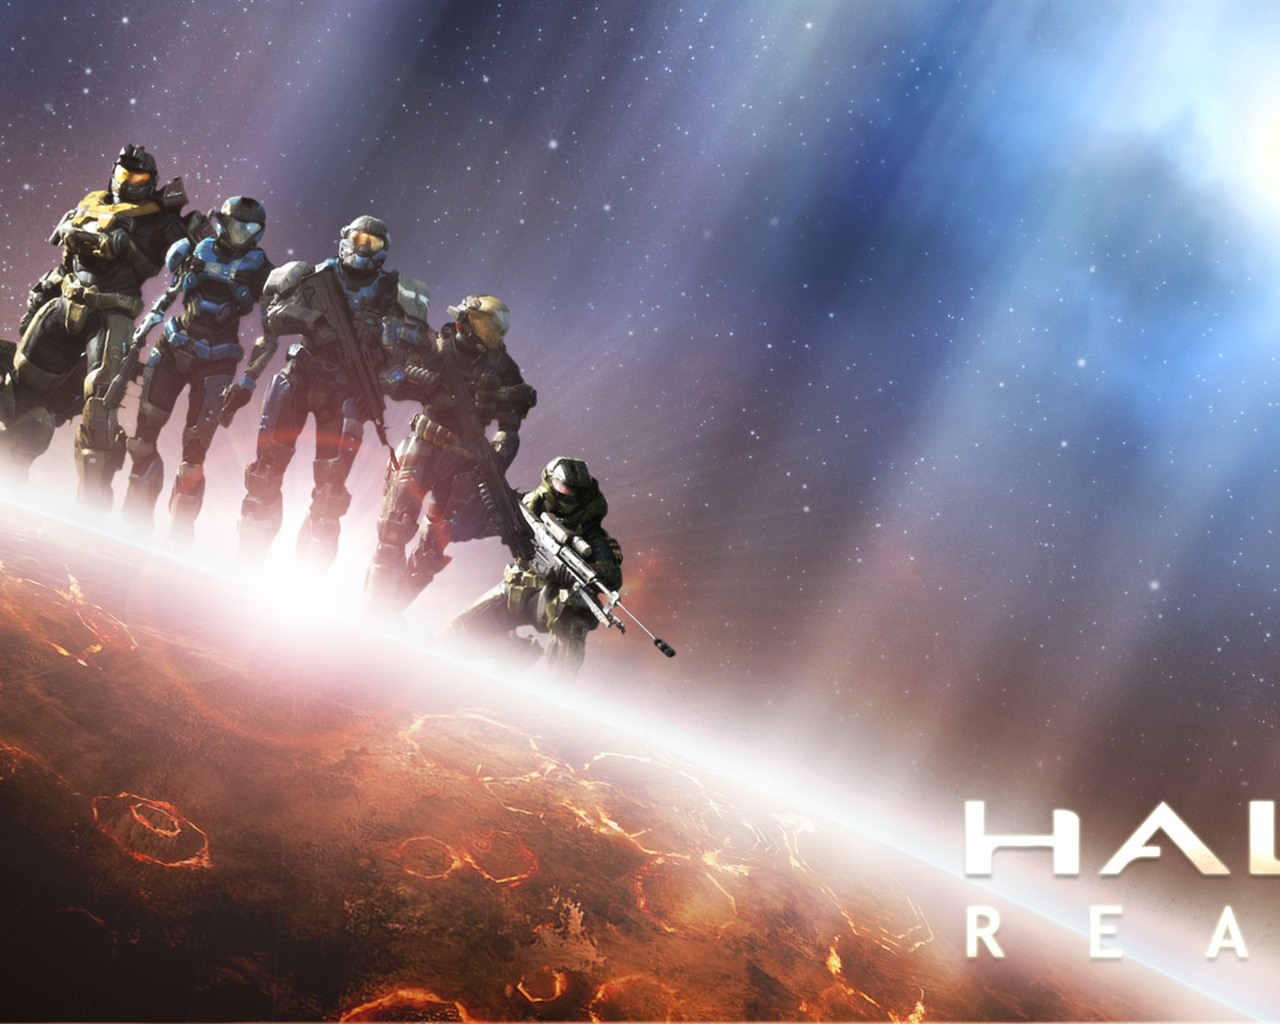 Halo game HD wallpapers #18 - 1280x1024